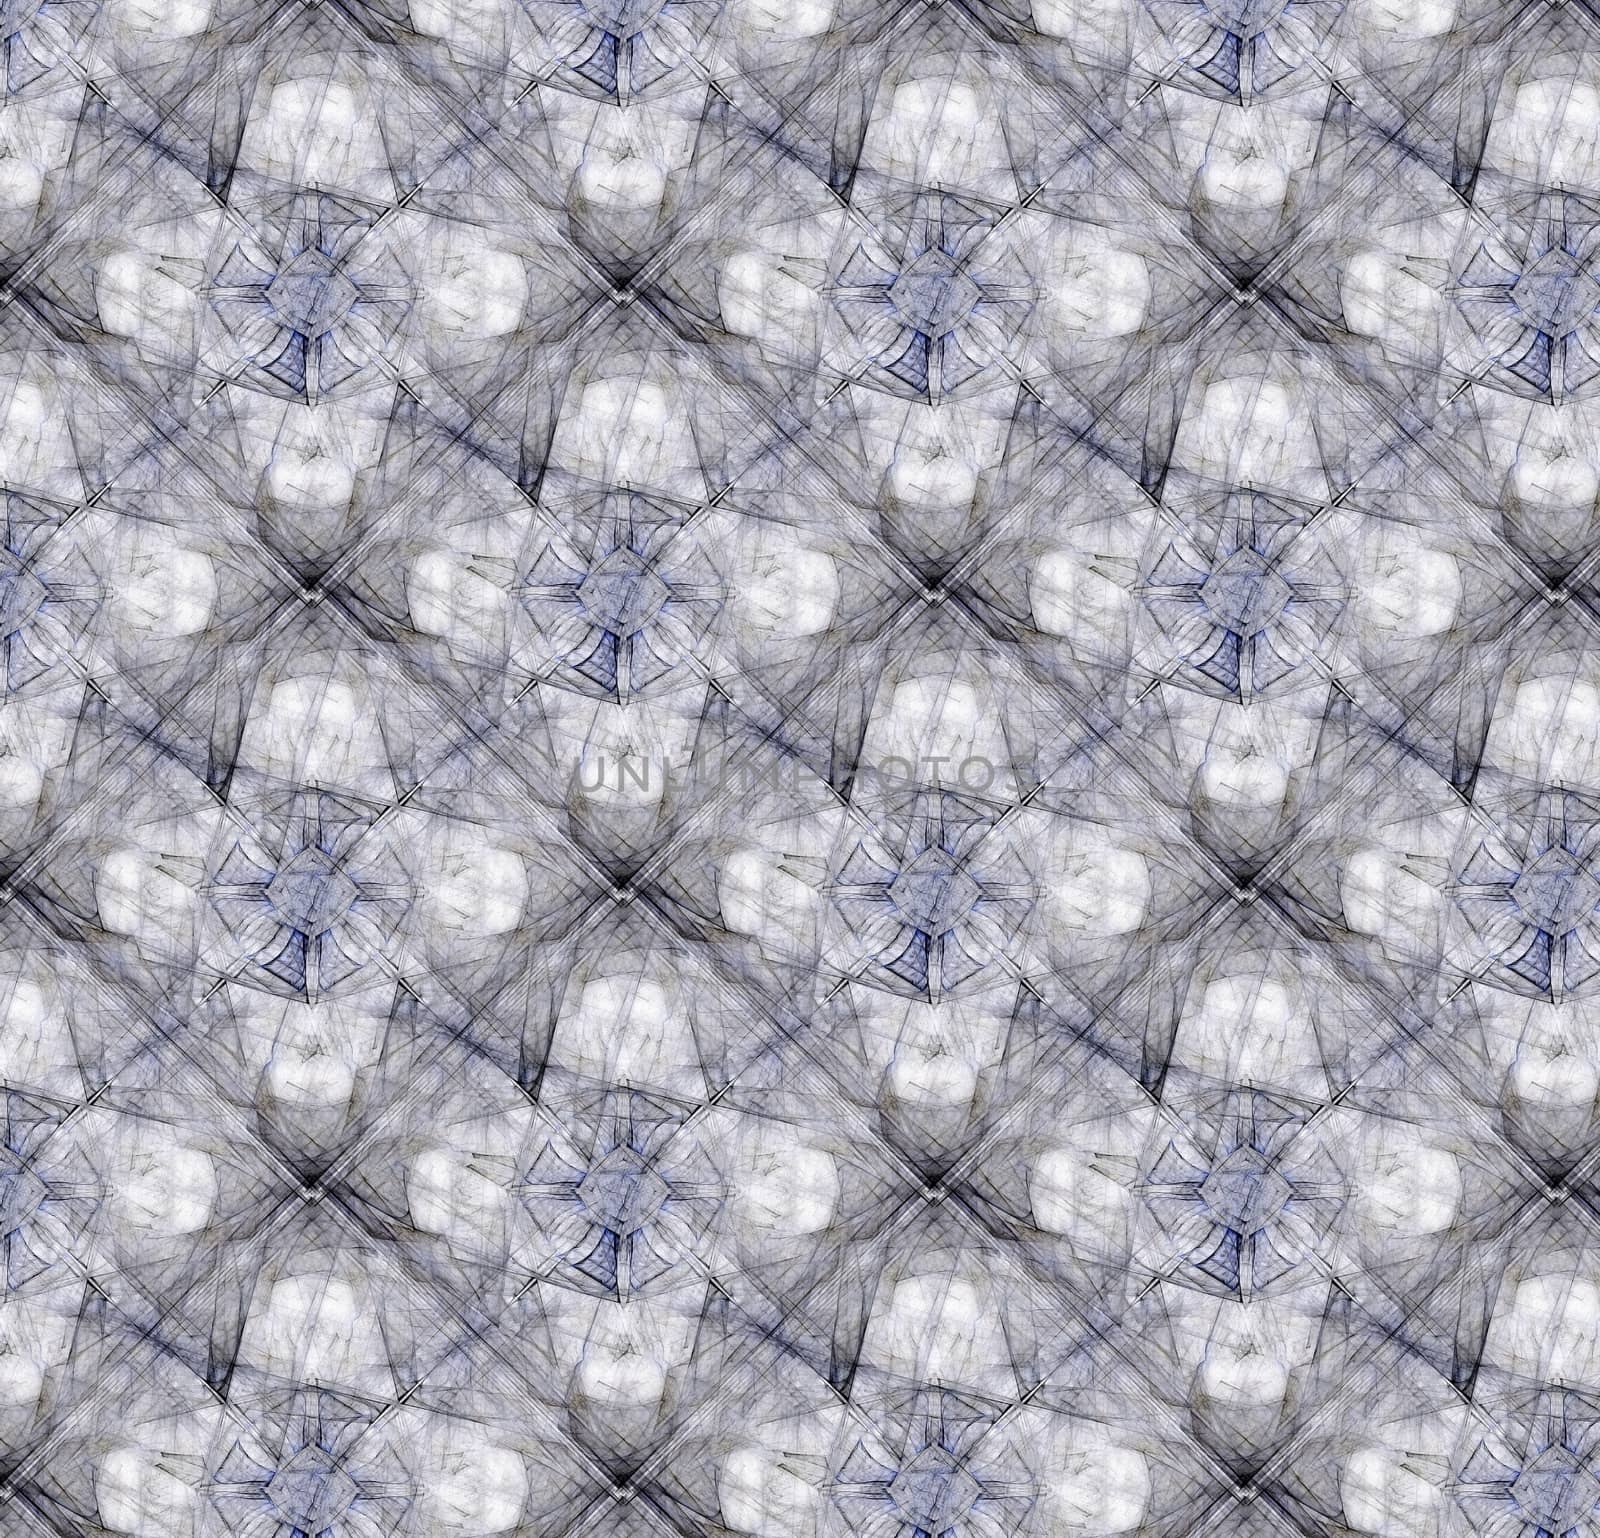 A gray and blue transparent seamless texture made from complex square fractal tiles